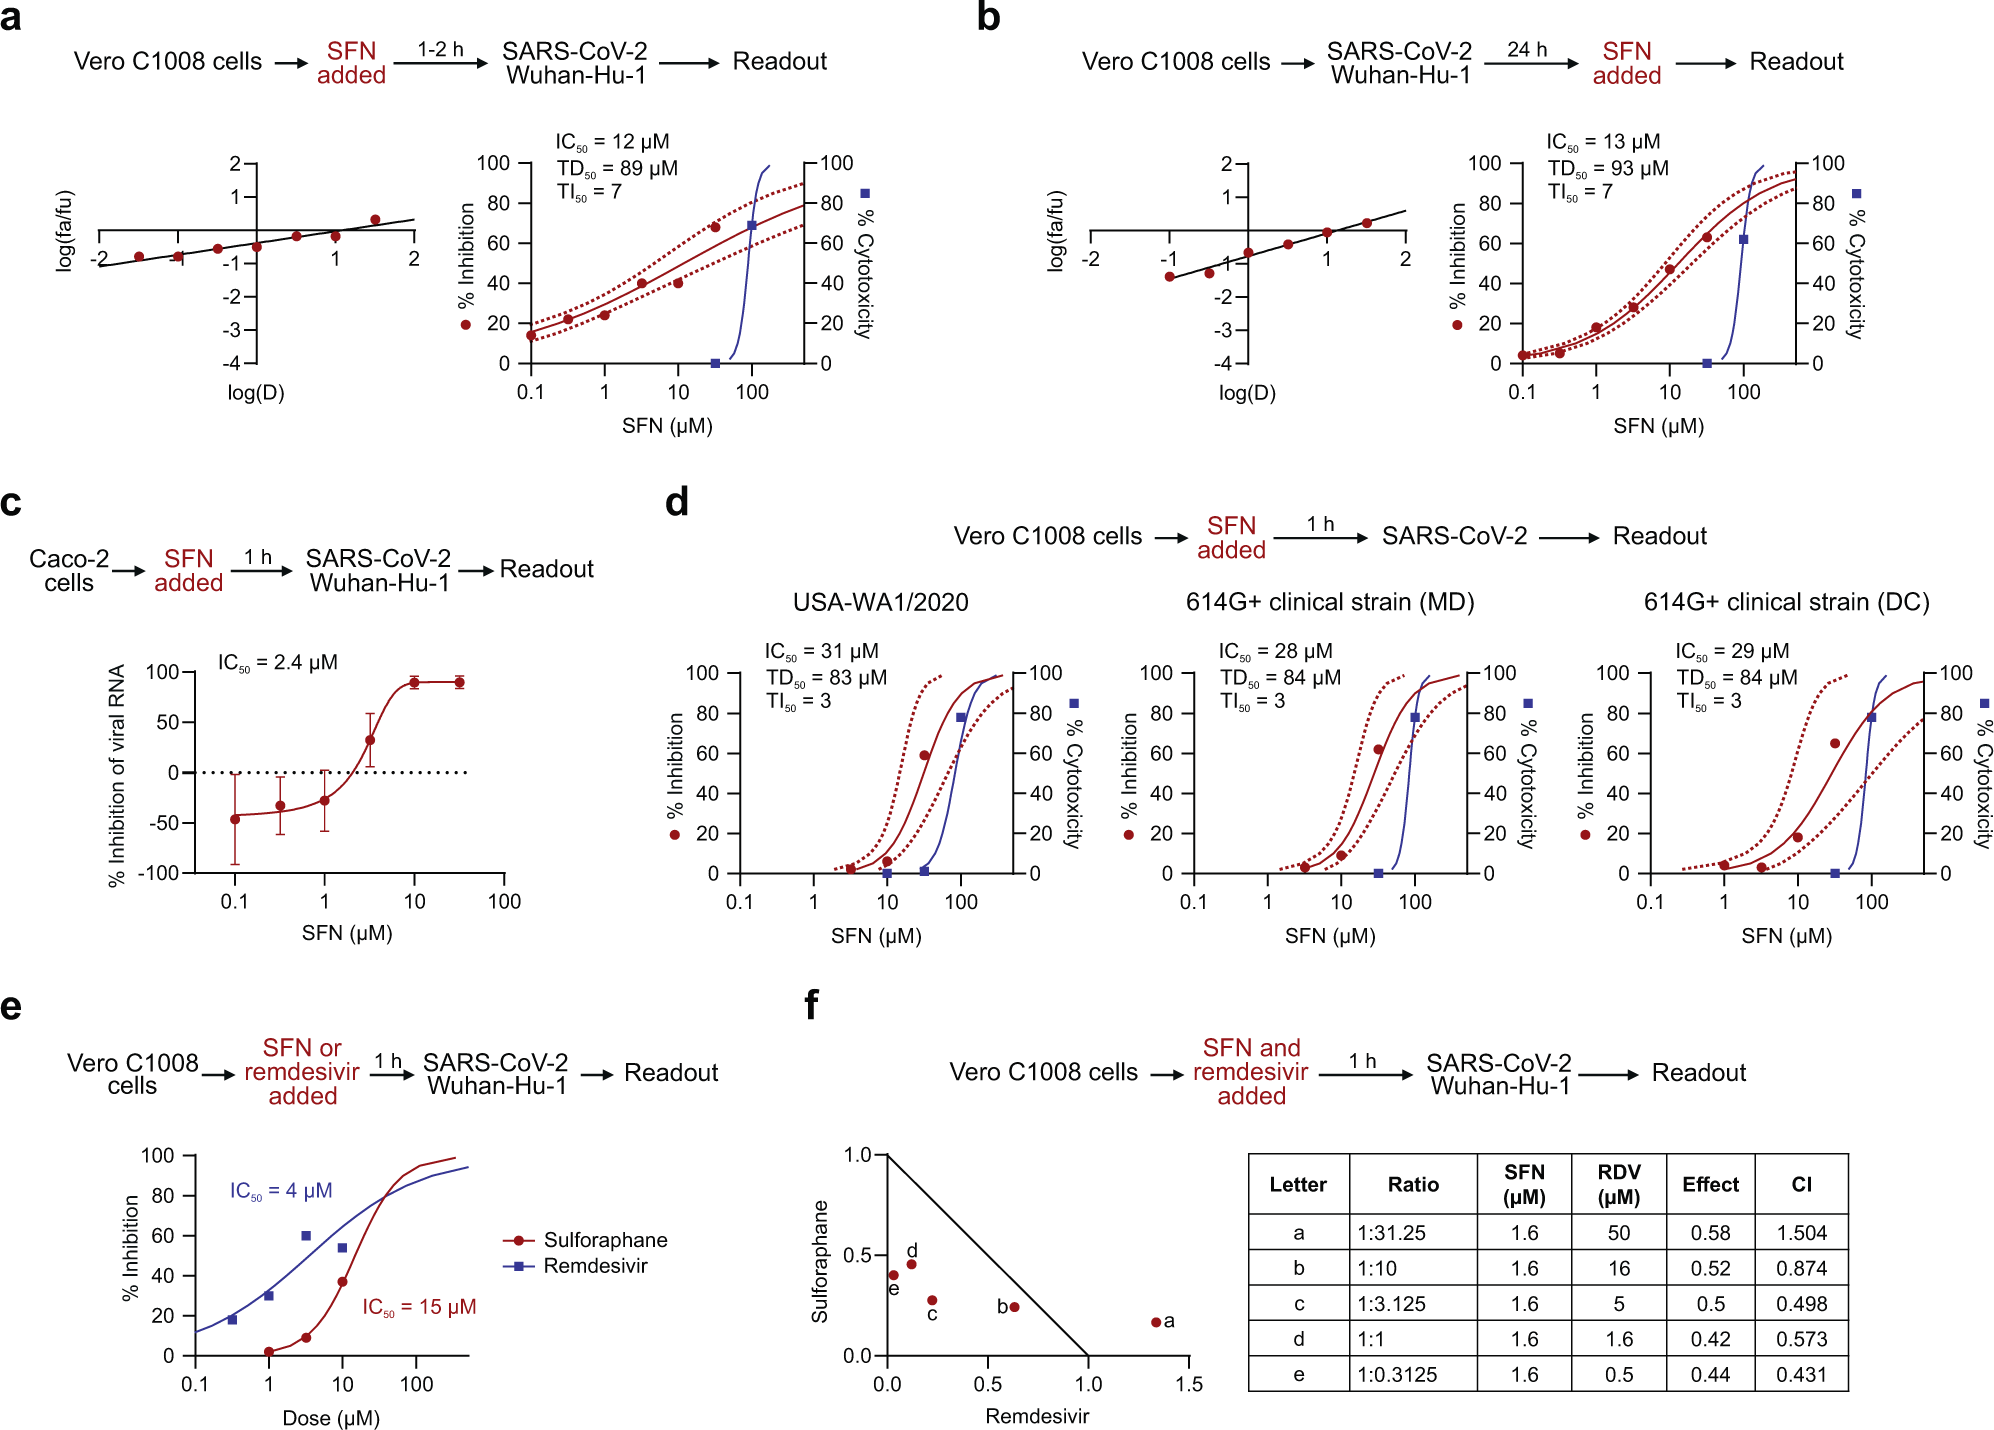 Median effect plot and dose-effect curves calculated for a Vero C1008 cells infected with SARS-CoV-2/Wuhan-Hu-1 after 1–2 h incubation with increasing concentrations of SFN; b Vero C1008 cells infected with SARS-CoV-2/Wuhan-Hu-1 for 24 h and then incubated with SFN. Antiviral data is displayed in red; anti-host cell activity (cytotoxicity) is displayed in blue. c The antiviral activity in human Caco-2 cells was determined by measuring viral RNA by qPCR. The cells were incubated with SFN for 1 h before viral inoculation. d Effects of SFN evaluated in Vero C1008 cells exposed to drug for 1 h followed by viral inoculation. A reference strain (USA-WA1/2020) and two 614G+ clinical strains of SARS-CoV-2 were evaluated for CPE using a bioluminescence readout. e Effects of SFN and remdesivir evaluated in Vero C1008 cells exposed to the drug for 1 h followed by viral inoculation. f Normalized isobologram showing combination index (CI) for combinations of various doses of SFN and remdesivir. Synergism (CI < 1); Additive effect (CI = 1); Antagonism (CI > 1); SFN, Sulforaphane; RDV, Remdesivir. Dotted lines represent 95% confidence interval. Experiments were performed a minimum of two times (range = 2–7), 3–6 replicates within each experiment, except the experiment shown in (e), which was performed once.